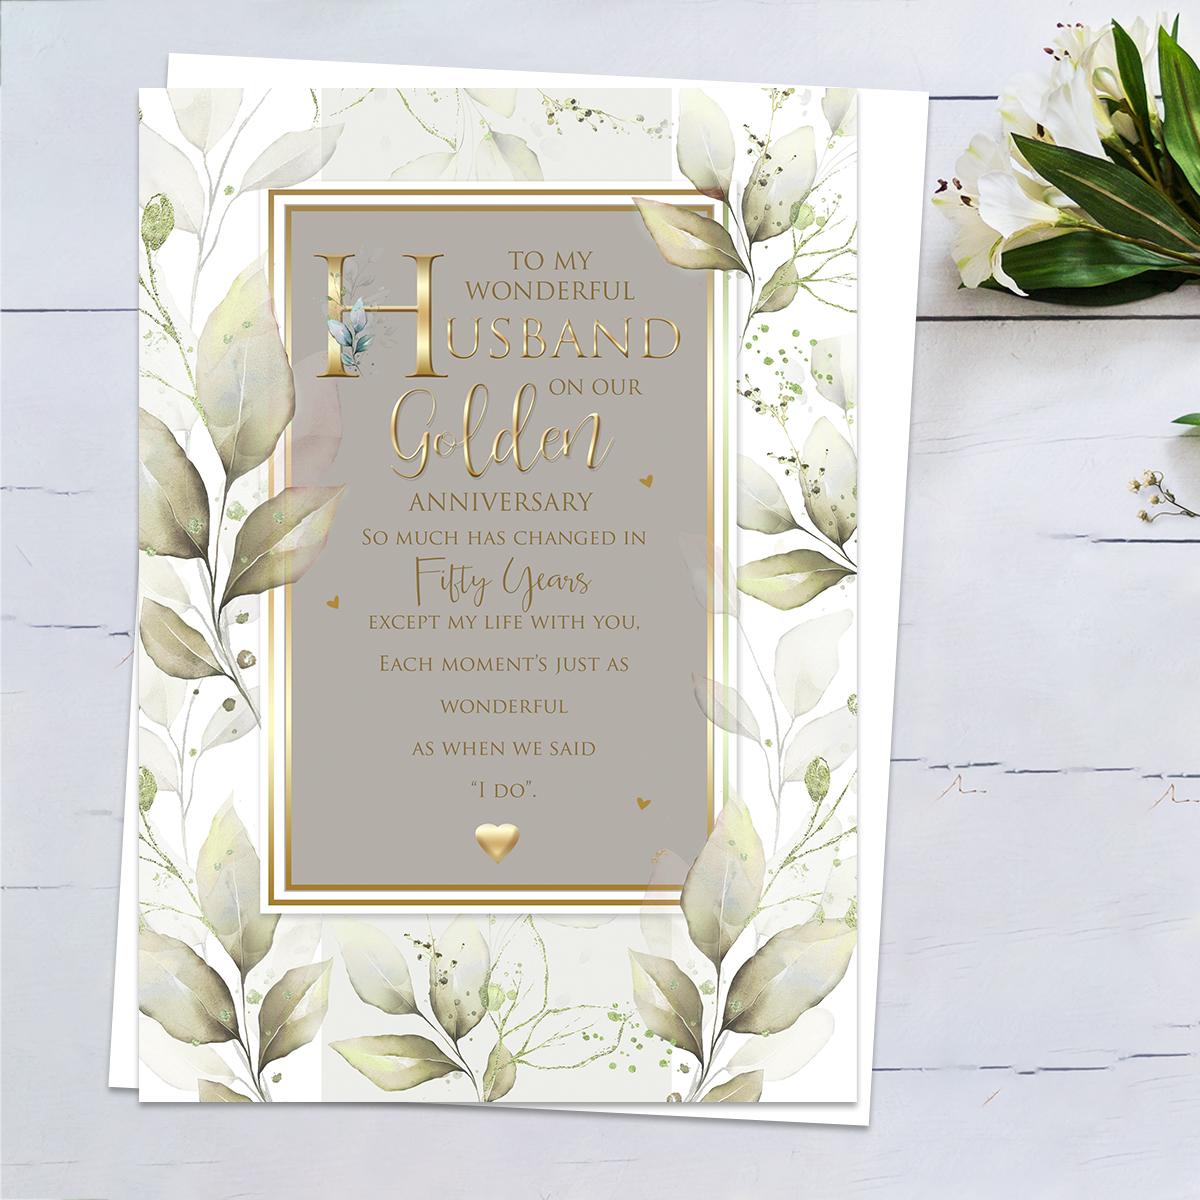 ' To My Wonderful Husband On Our Golden Anniversary' Featuring  Grey/Green And Brown Colours With Gold Foiling Detail And Heartfelt Words. Complete With White Envelope